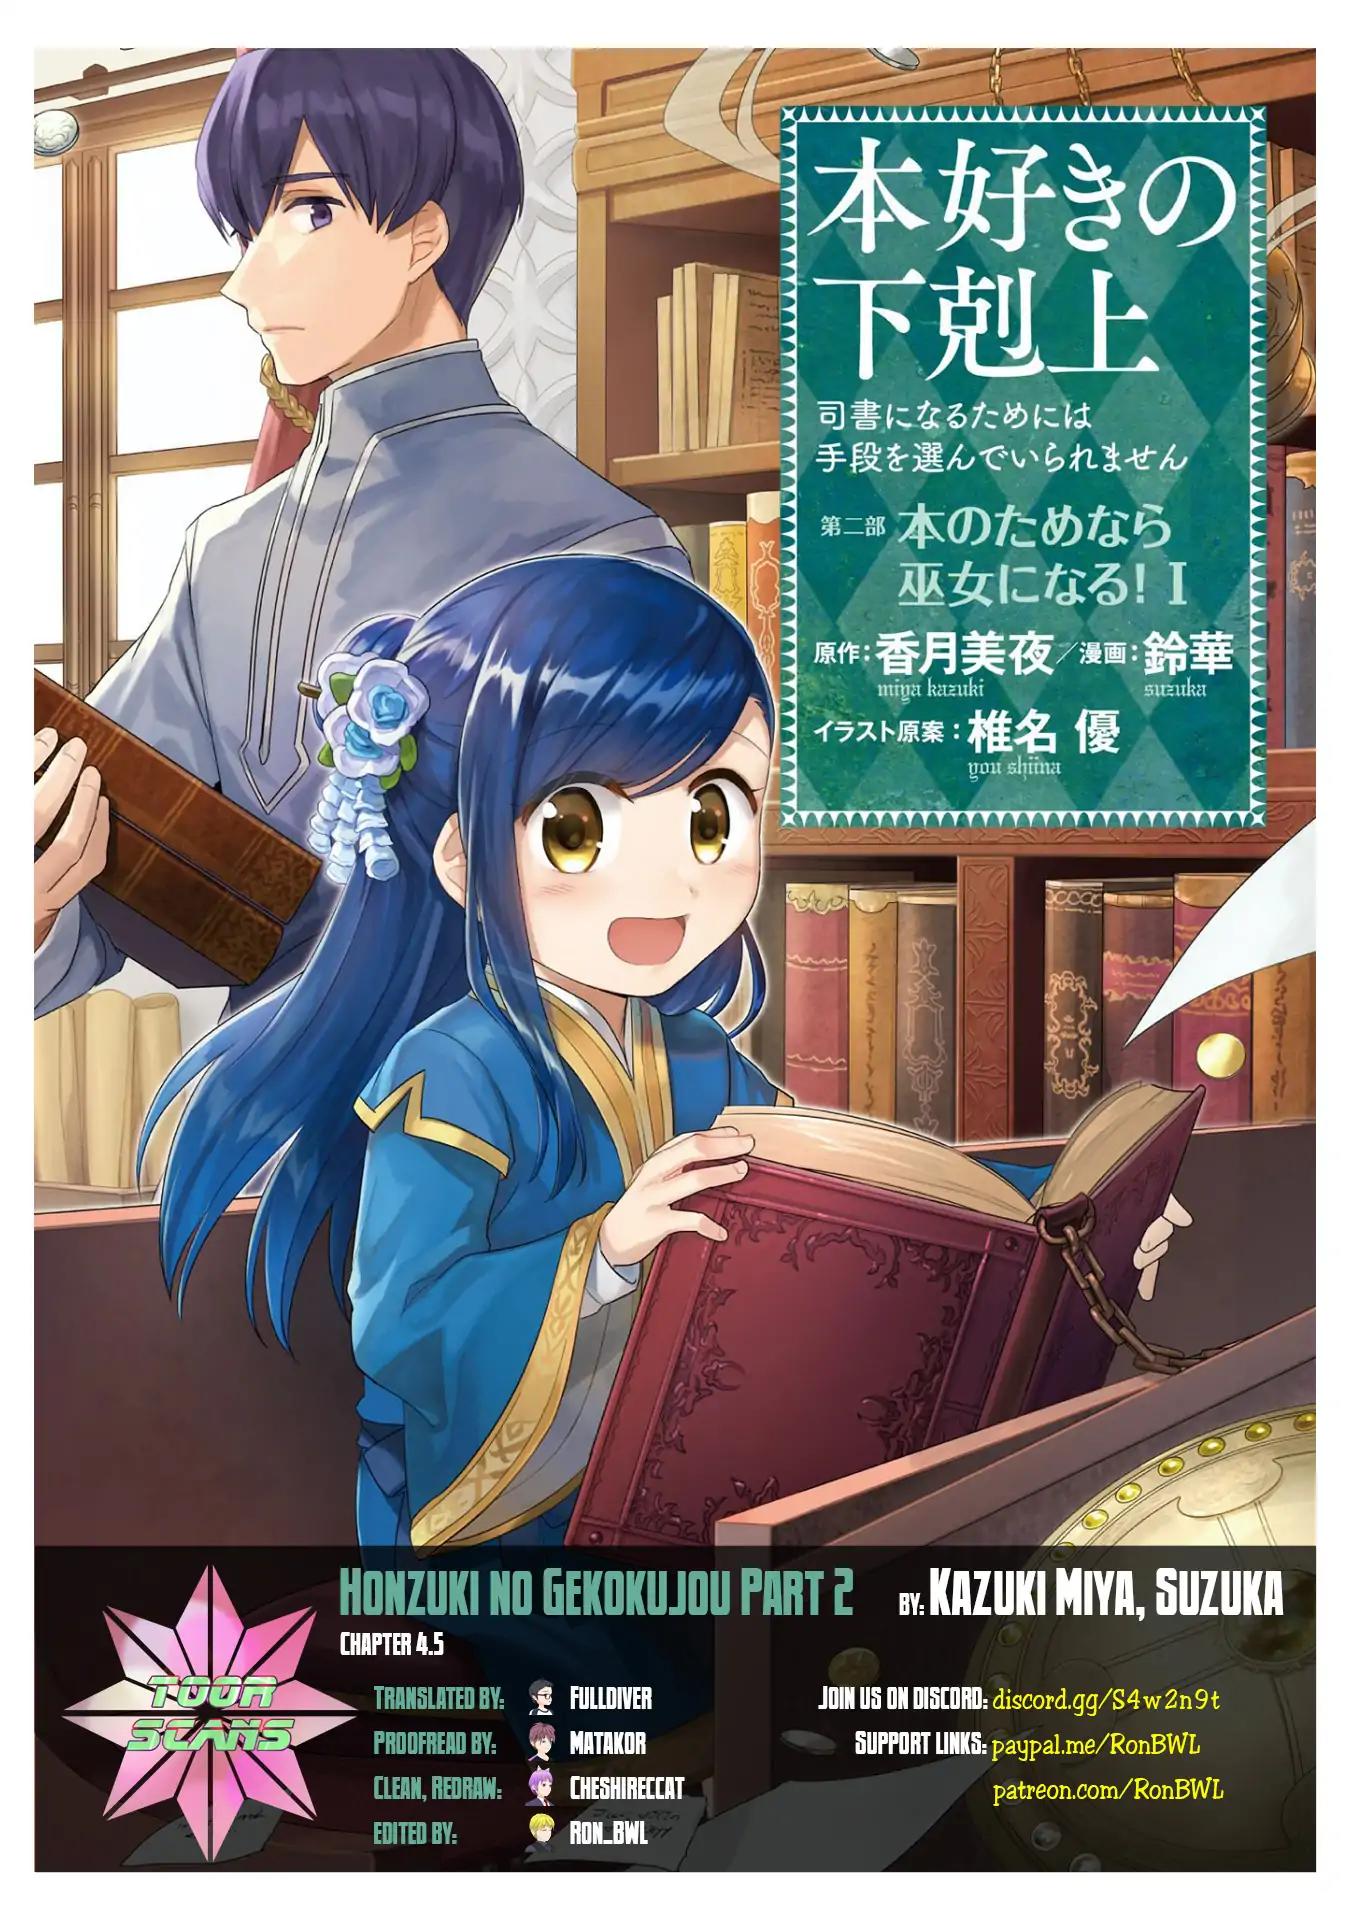 Ascendance of a Bookworm ~I'll Do Anything to Become a Librarian~ Part 2 「I'll Become a Shrine Maiden for Books!」 Vol.1 Chapter 4.5: